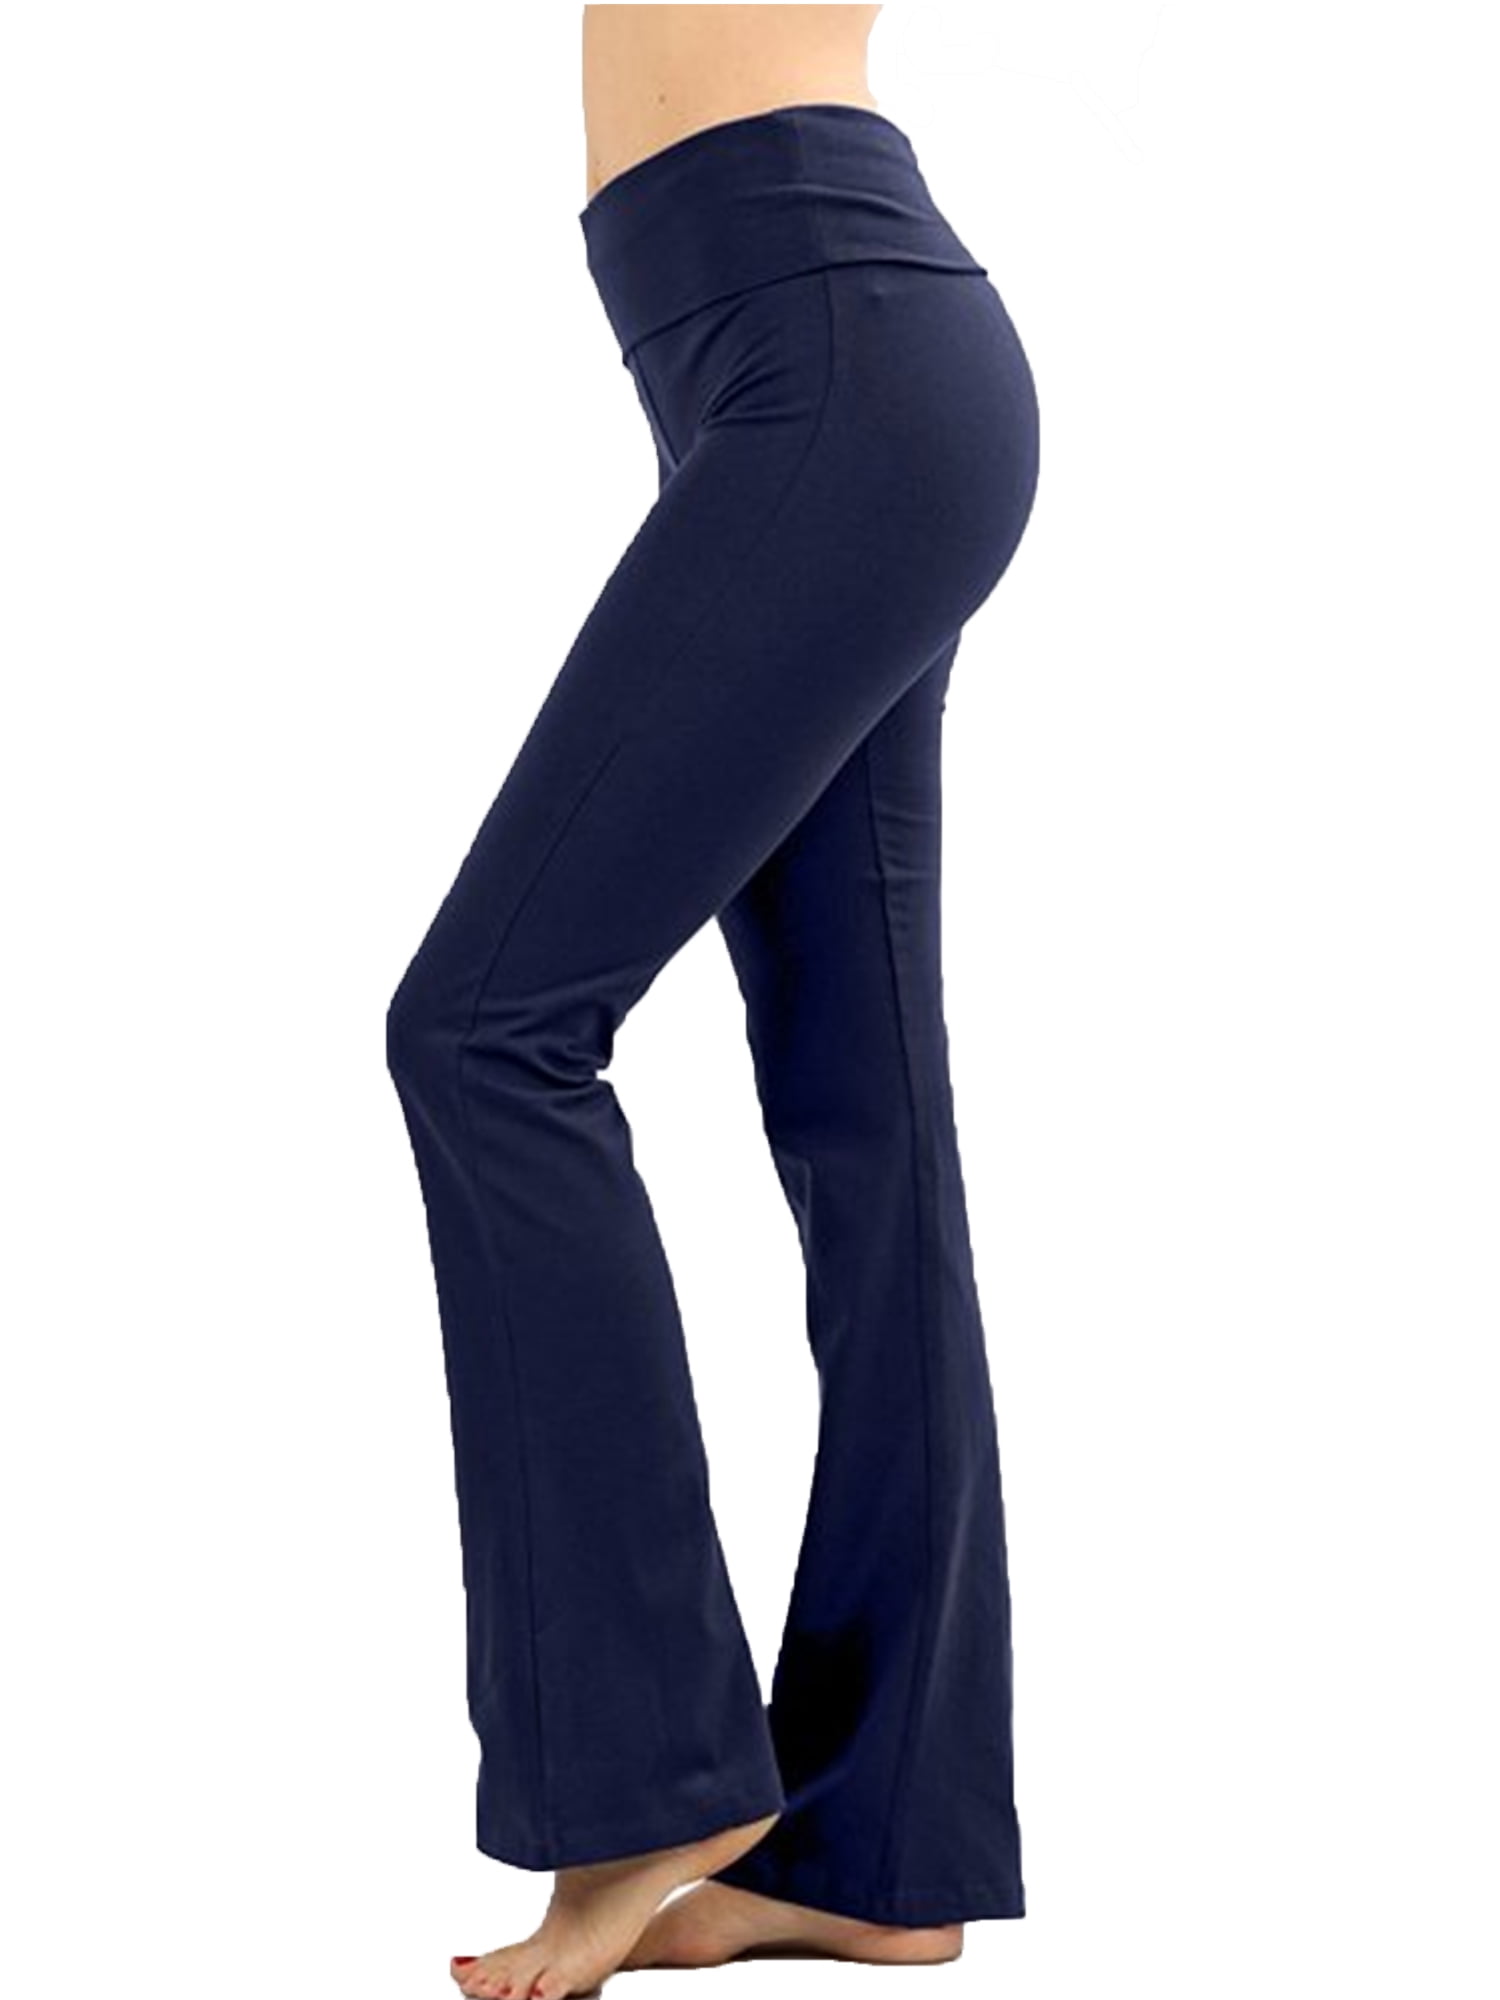 Women Bootcut Yoga Pants Bootleg Flared Trousers Workout Casual Fitness Stretch 